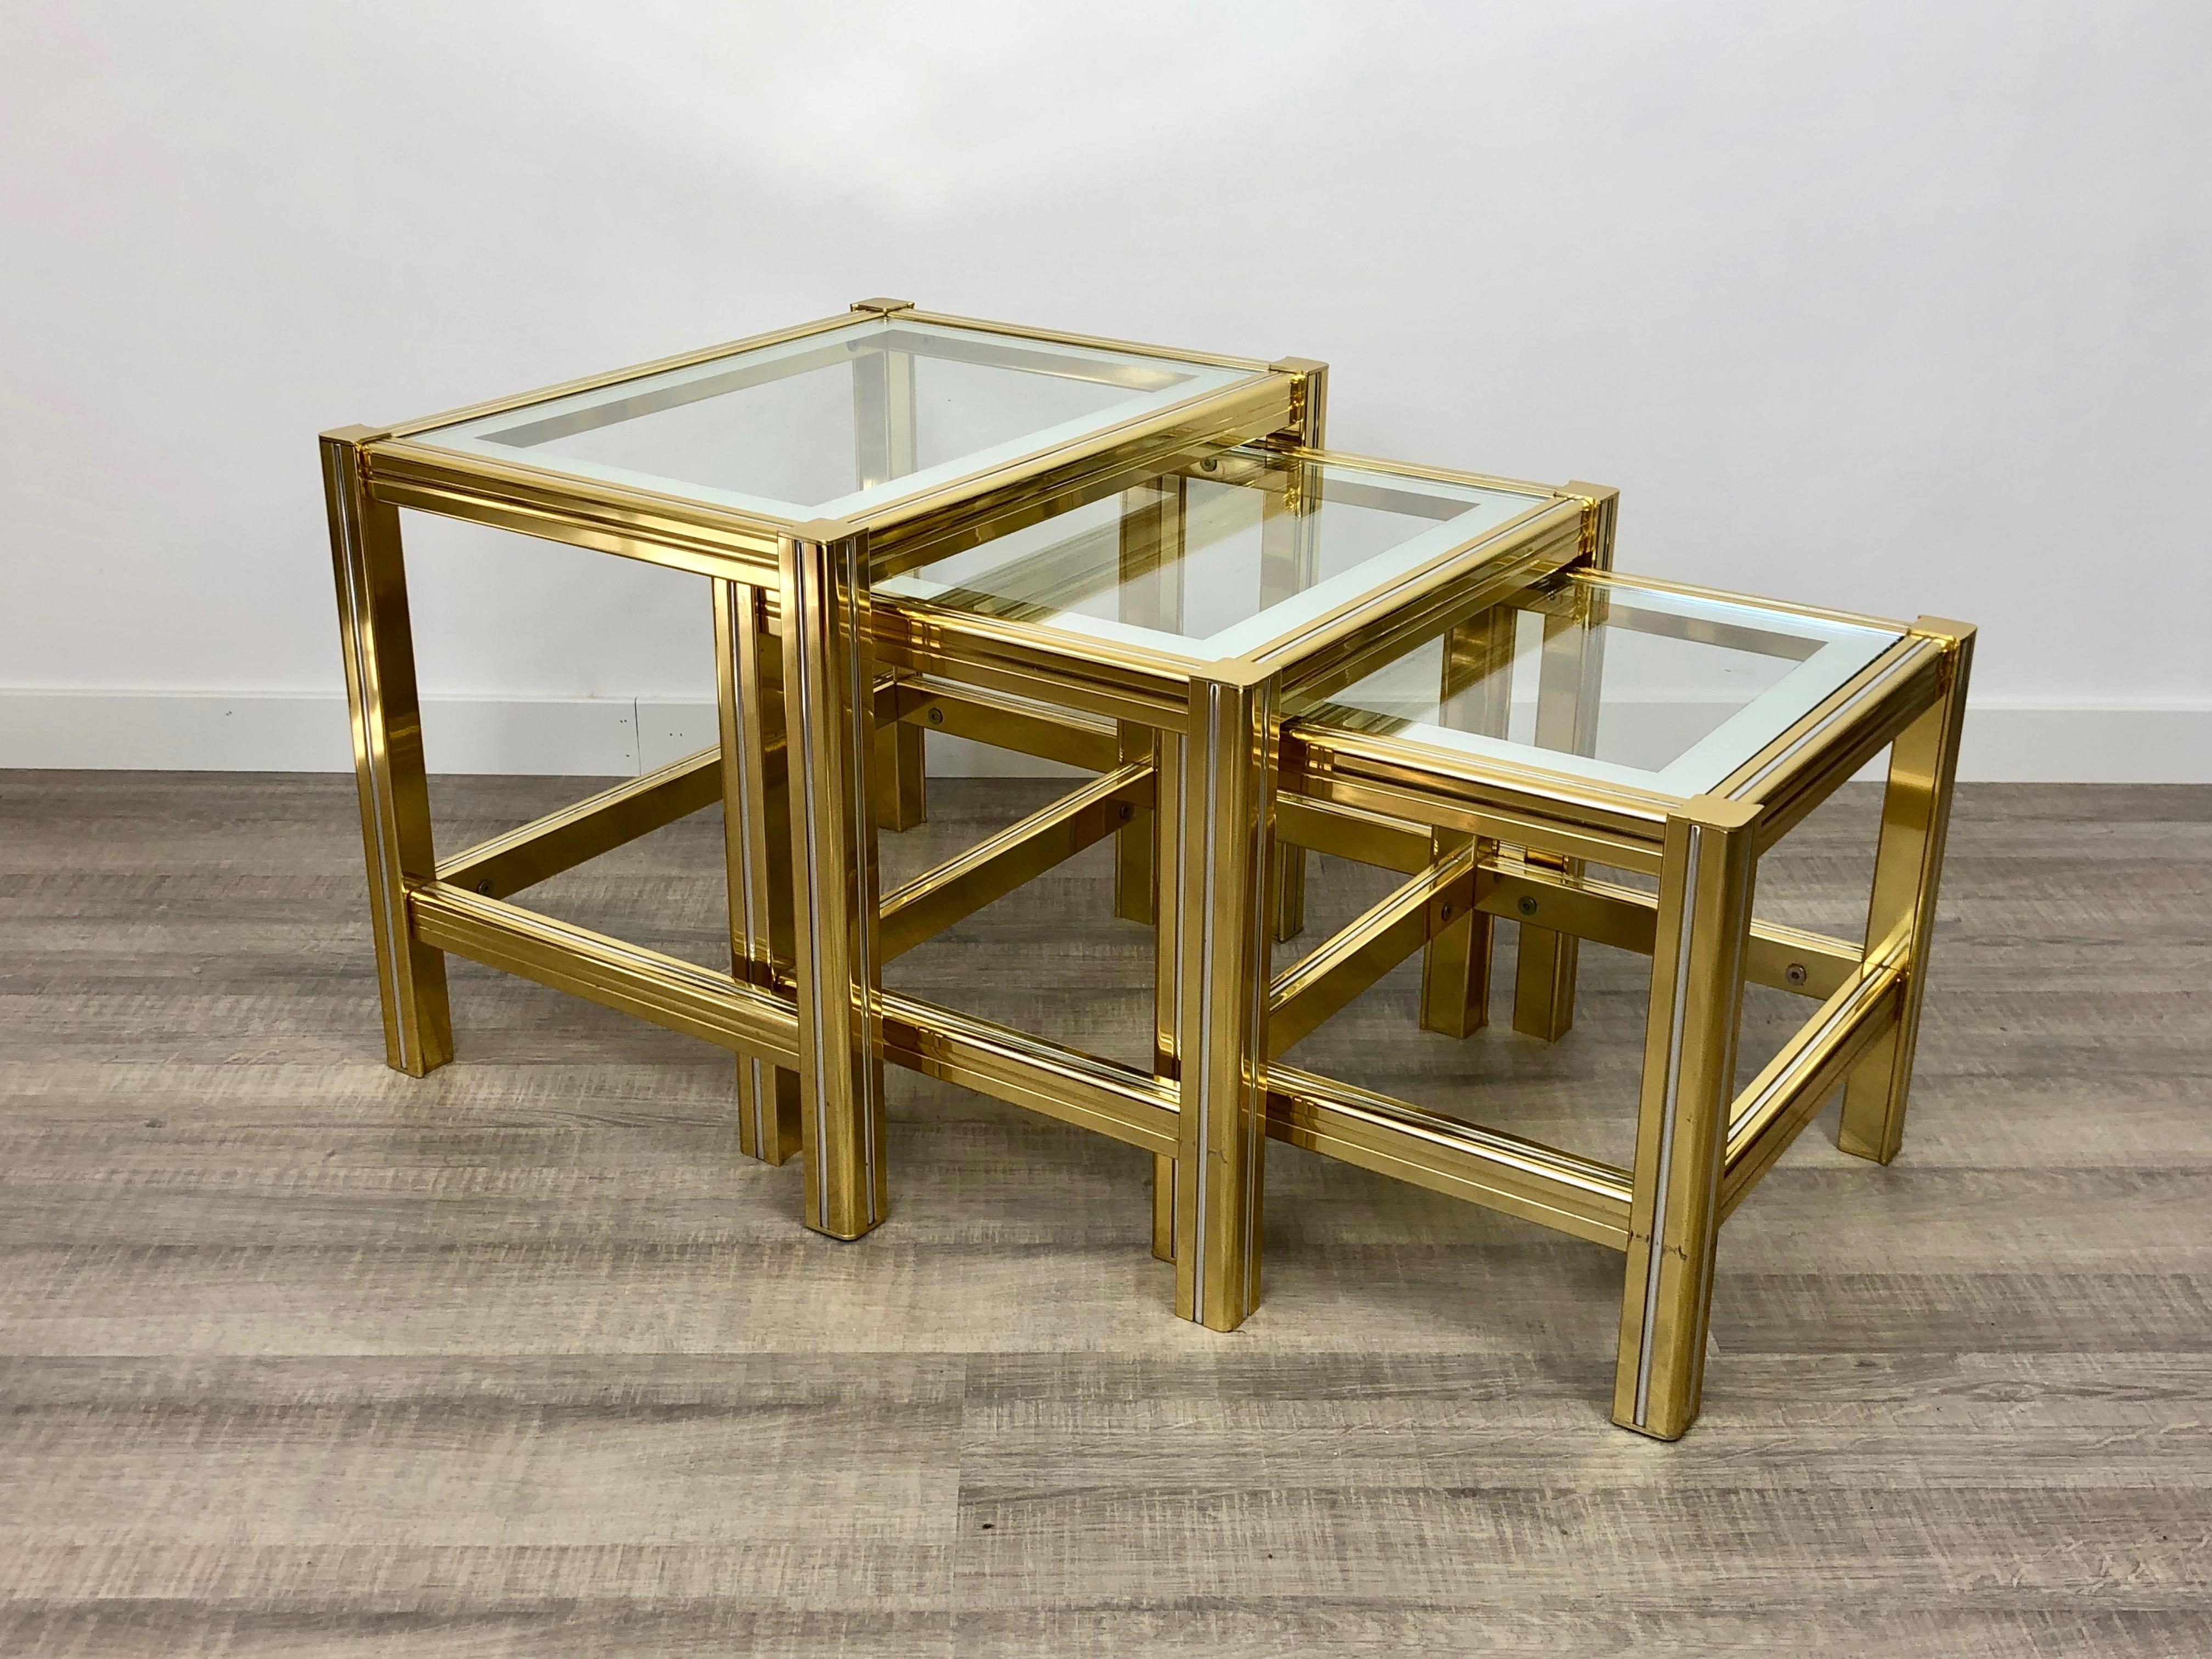 Italian Tris of Increasing Dimensions Side Coffe Table in Brass, Glass and Chrome, 1970s For Sale